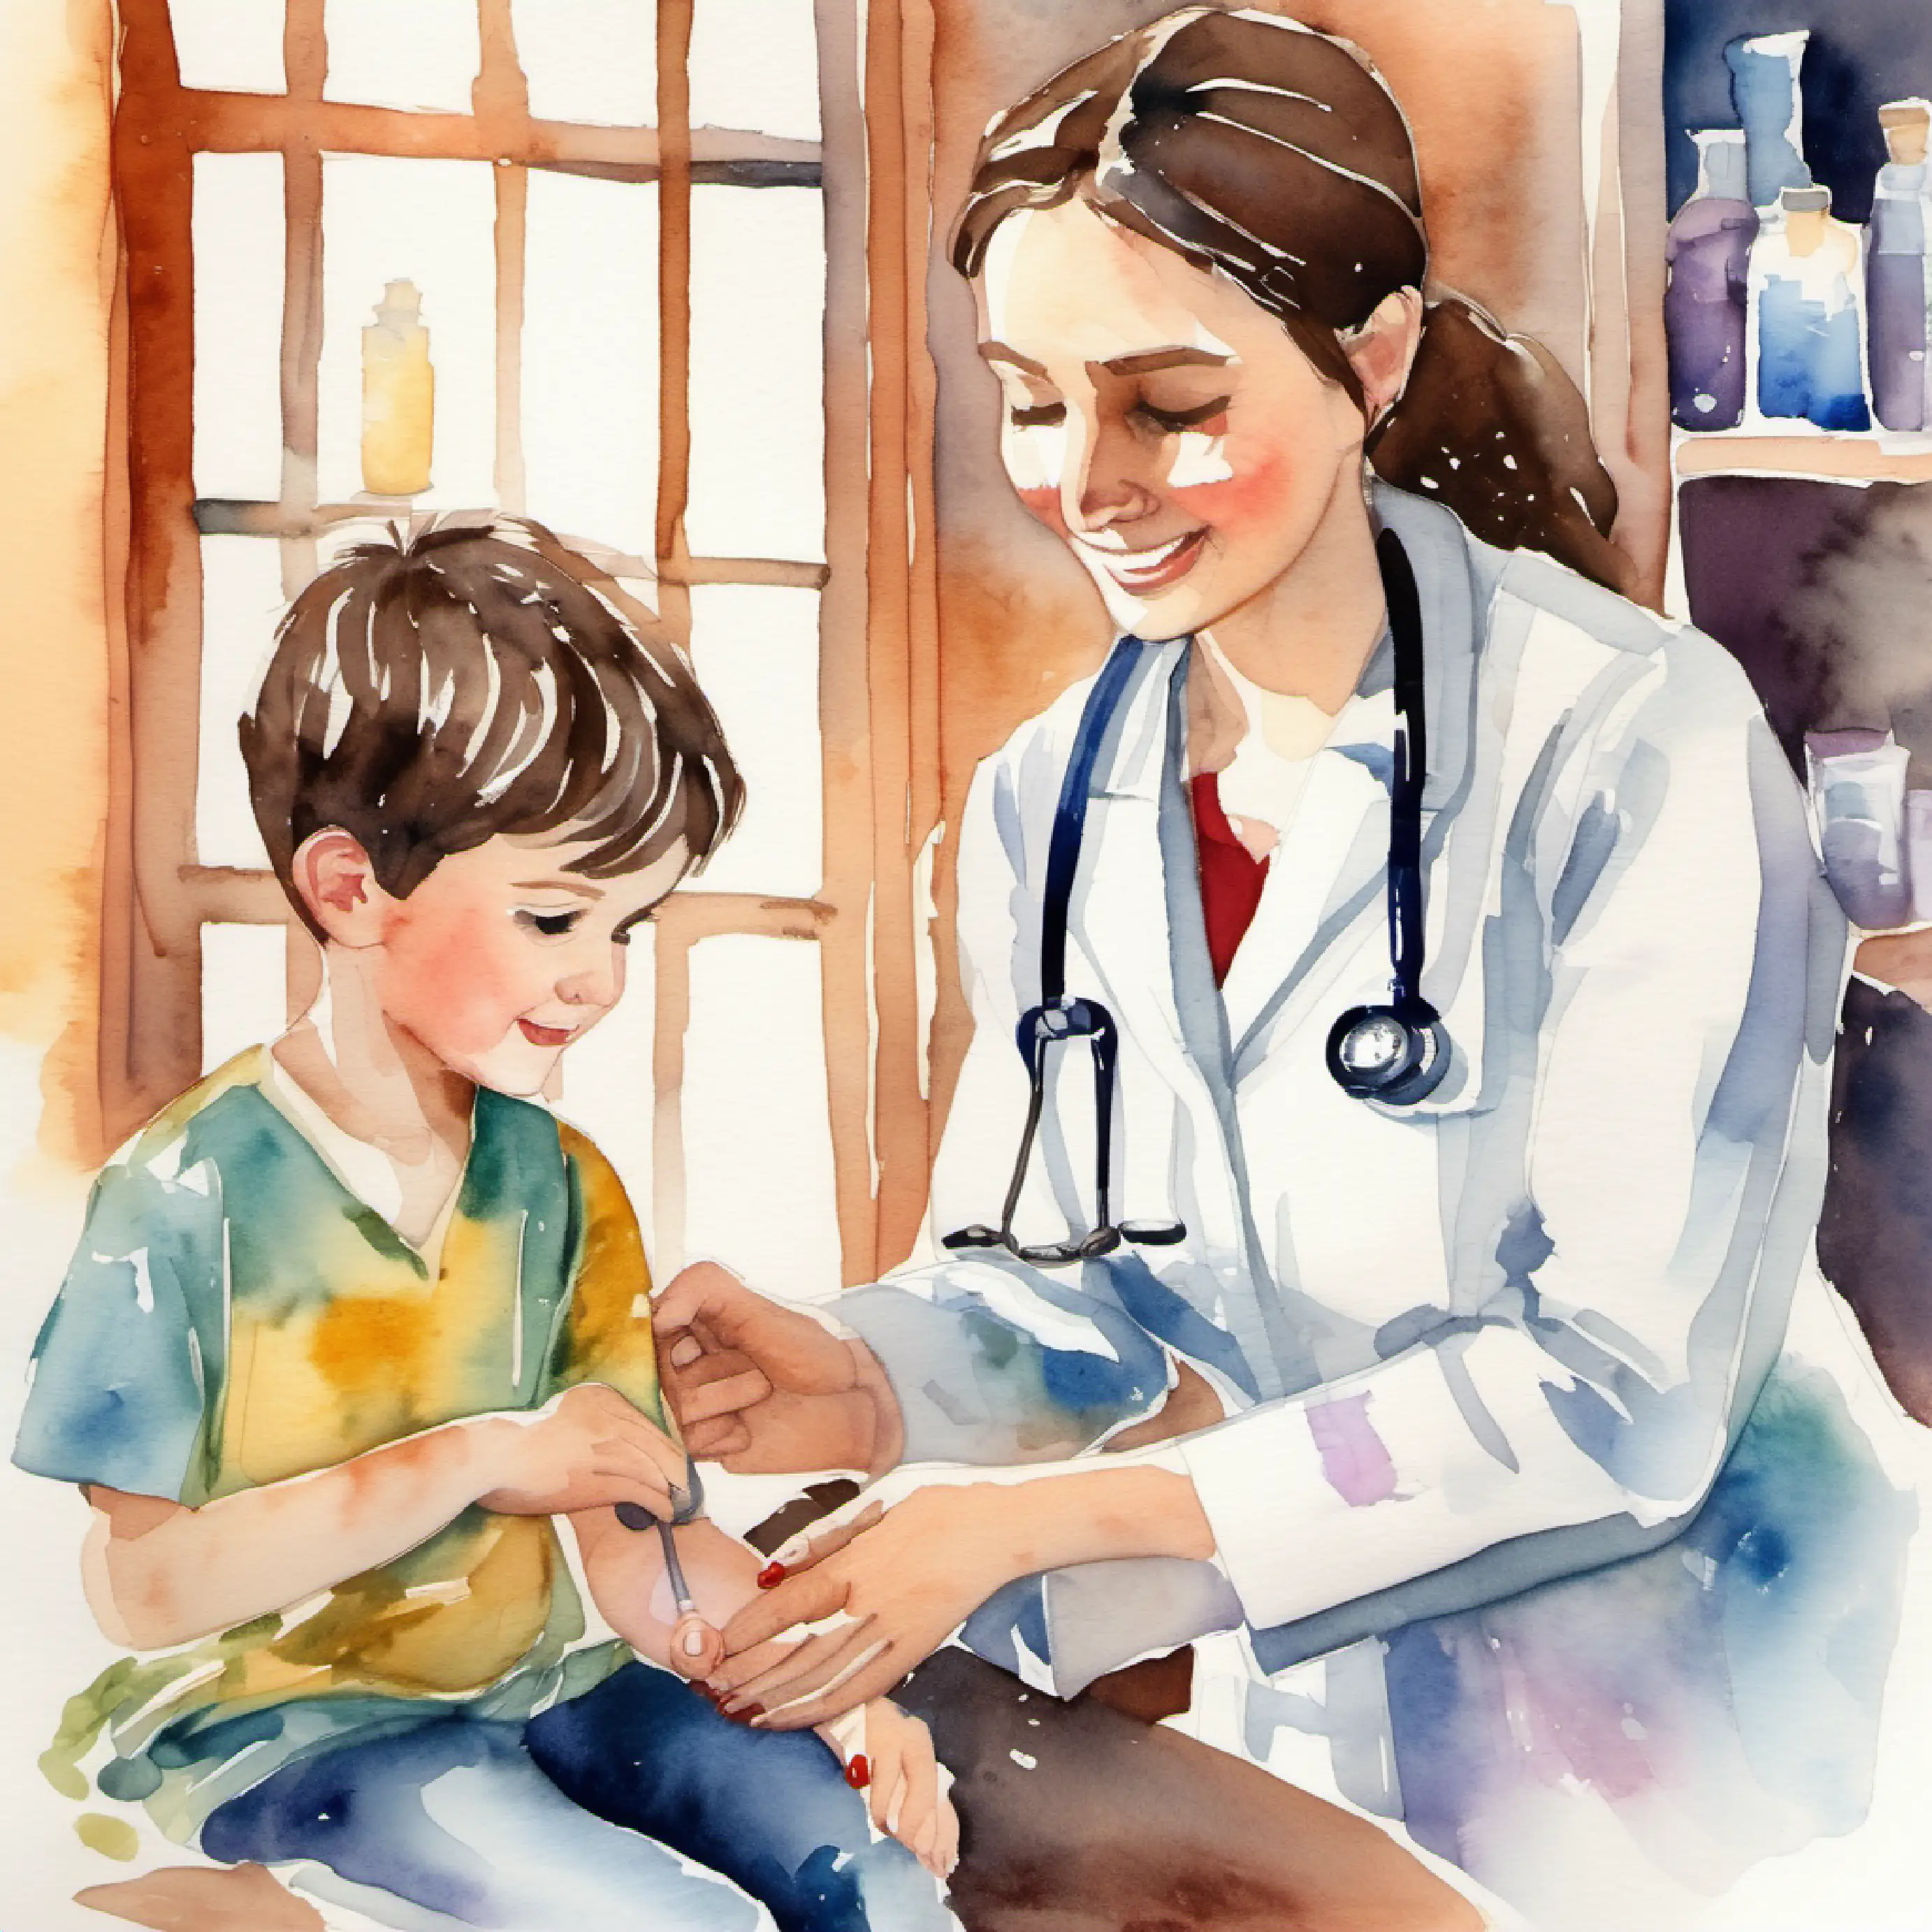 Young doctor with healing hands, kind eyes, warm smile treating a boy's injury with her remedies.